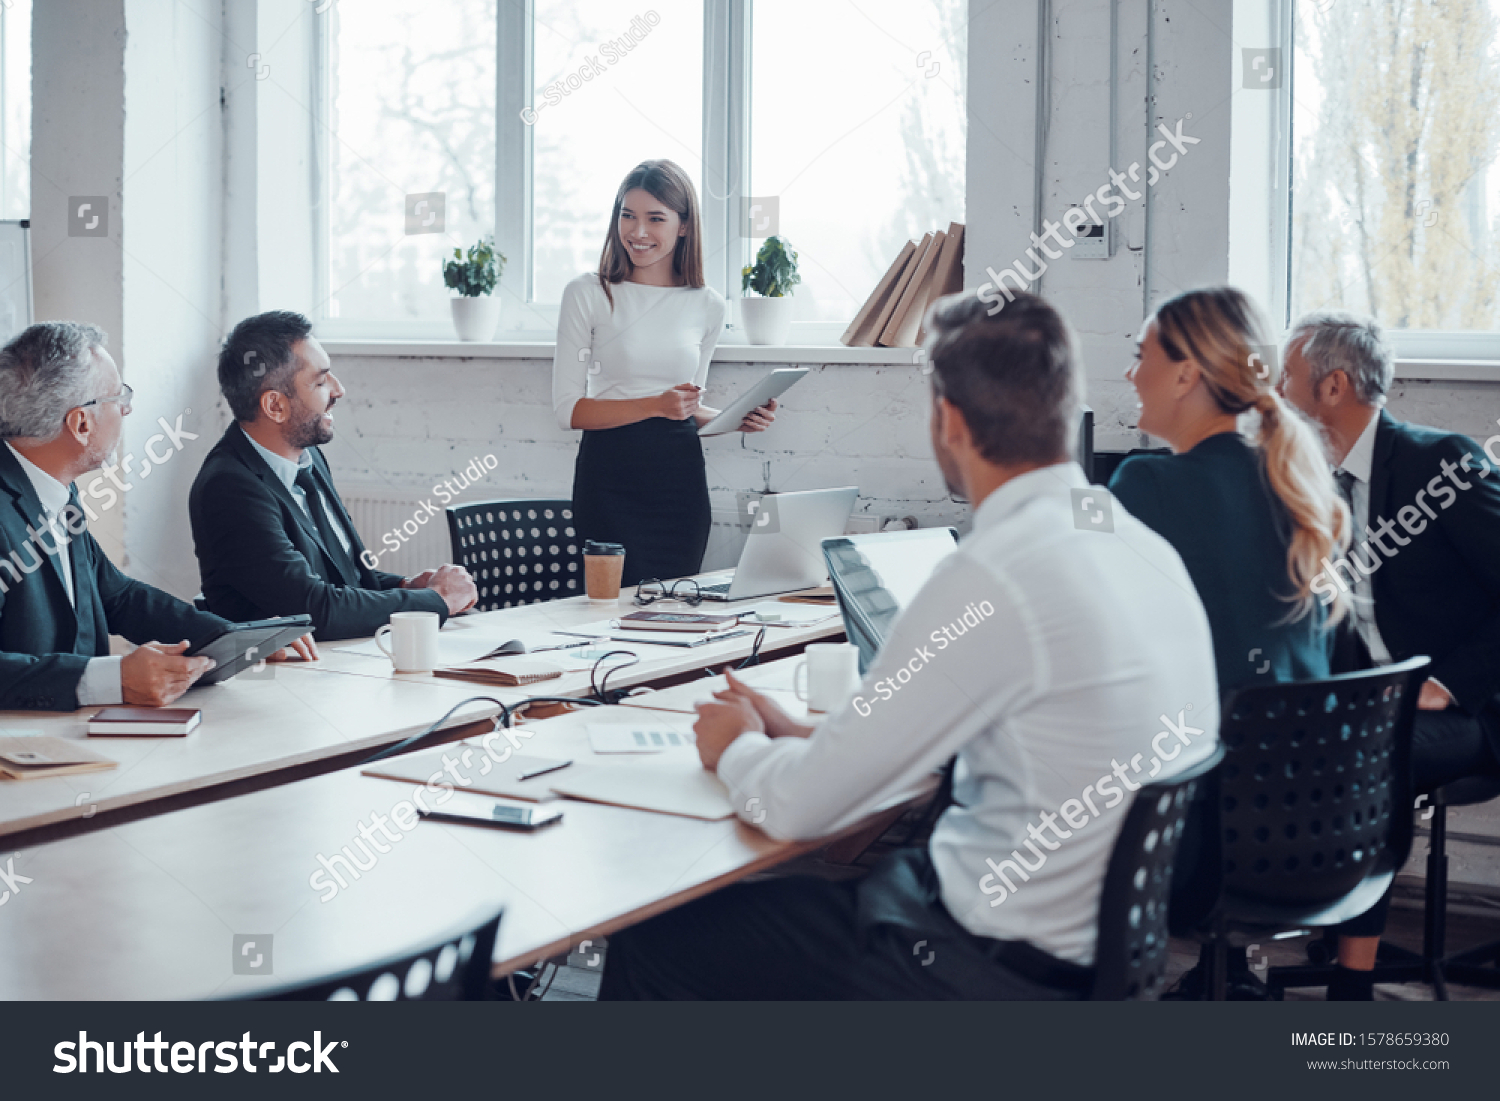 Professional business expert conducting meeting while working together with colleagues in the modern office #1578659380